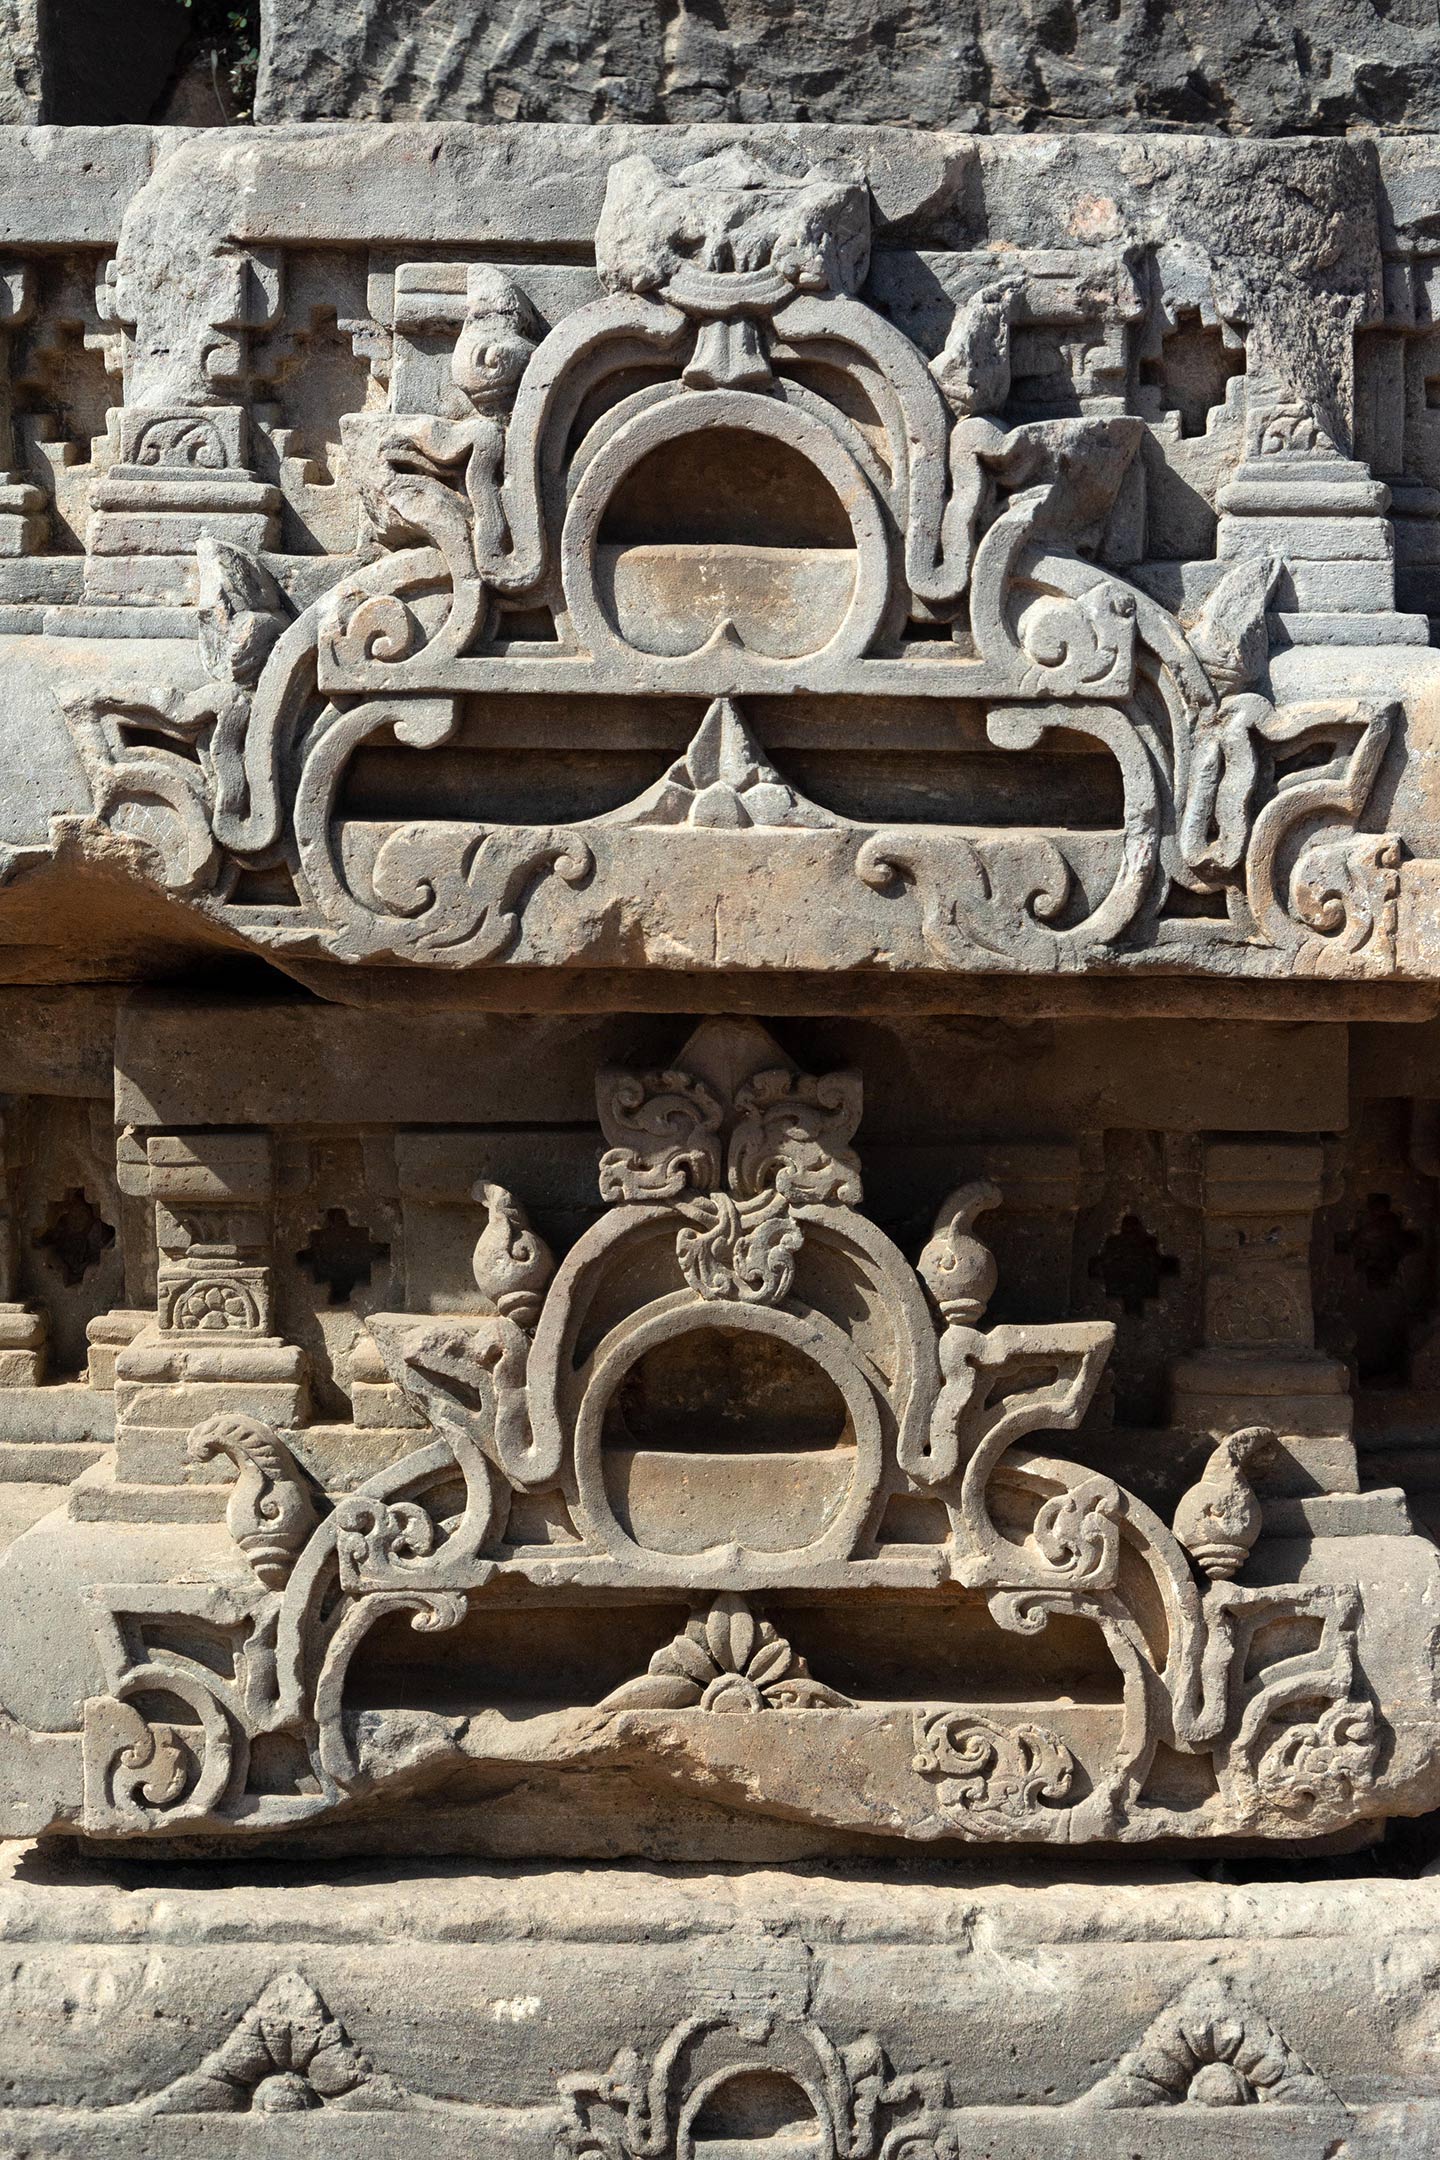 Broken debris from the original temple assembled on the northeast face of the adhisthana. Seen in the carvings are the split gavaksha motifs.